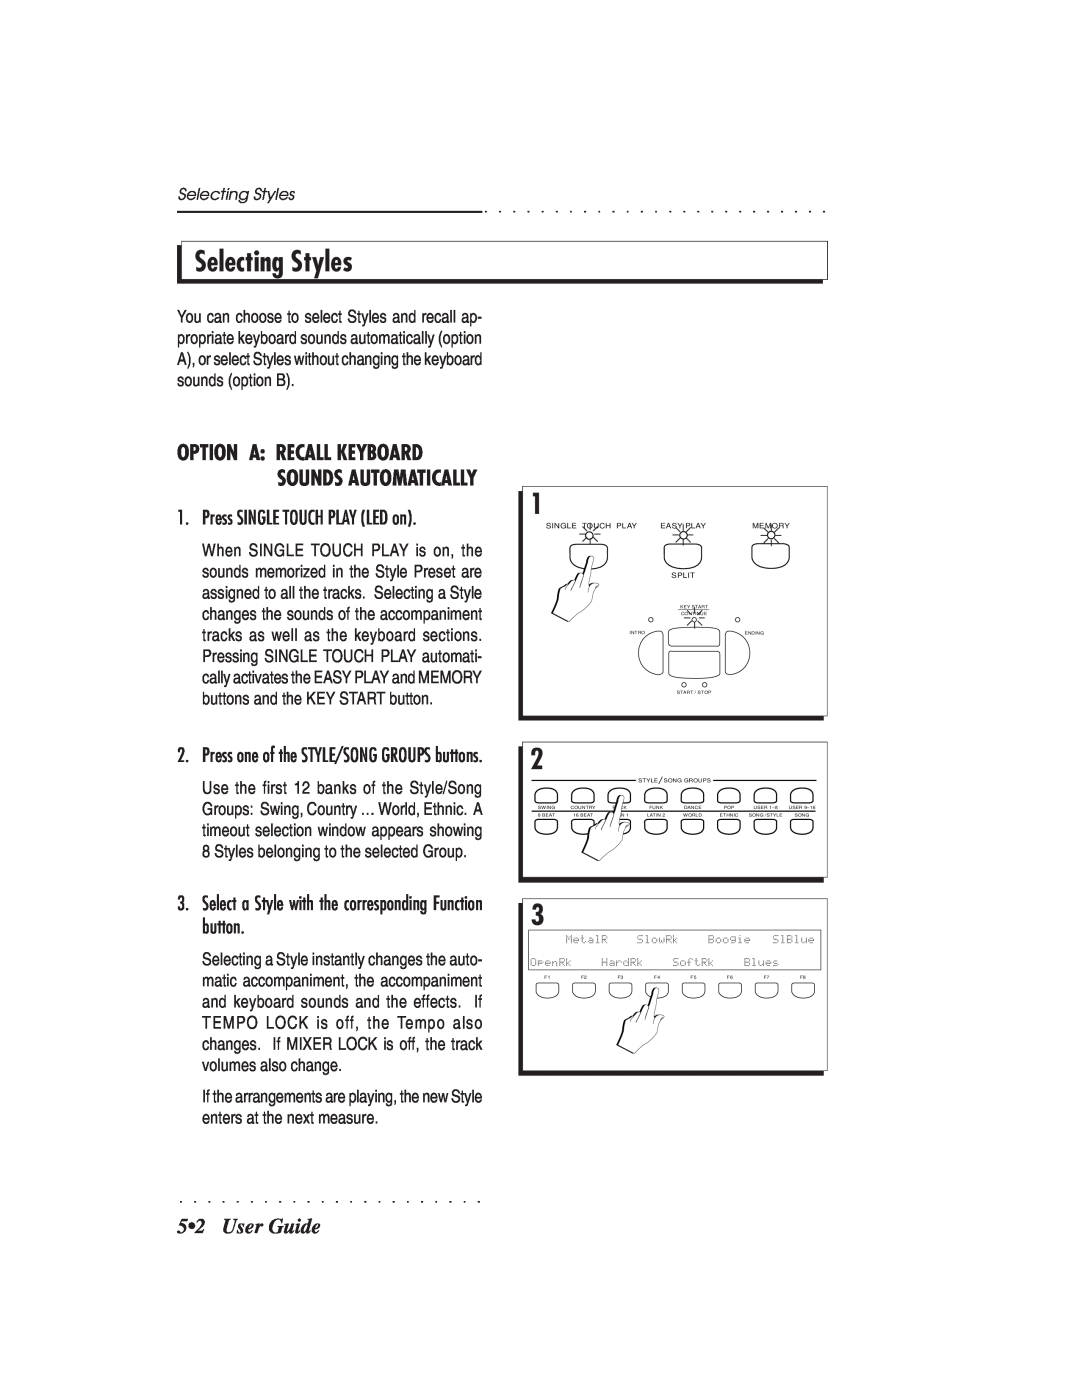 IBM PS1500 owner manual Selecting Styles, User Guide 